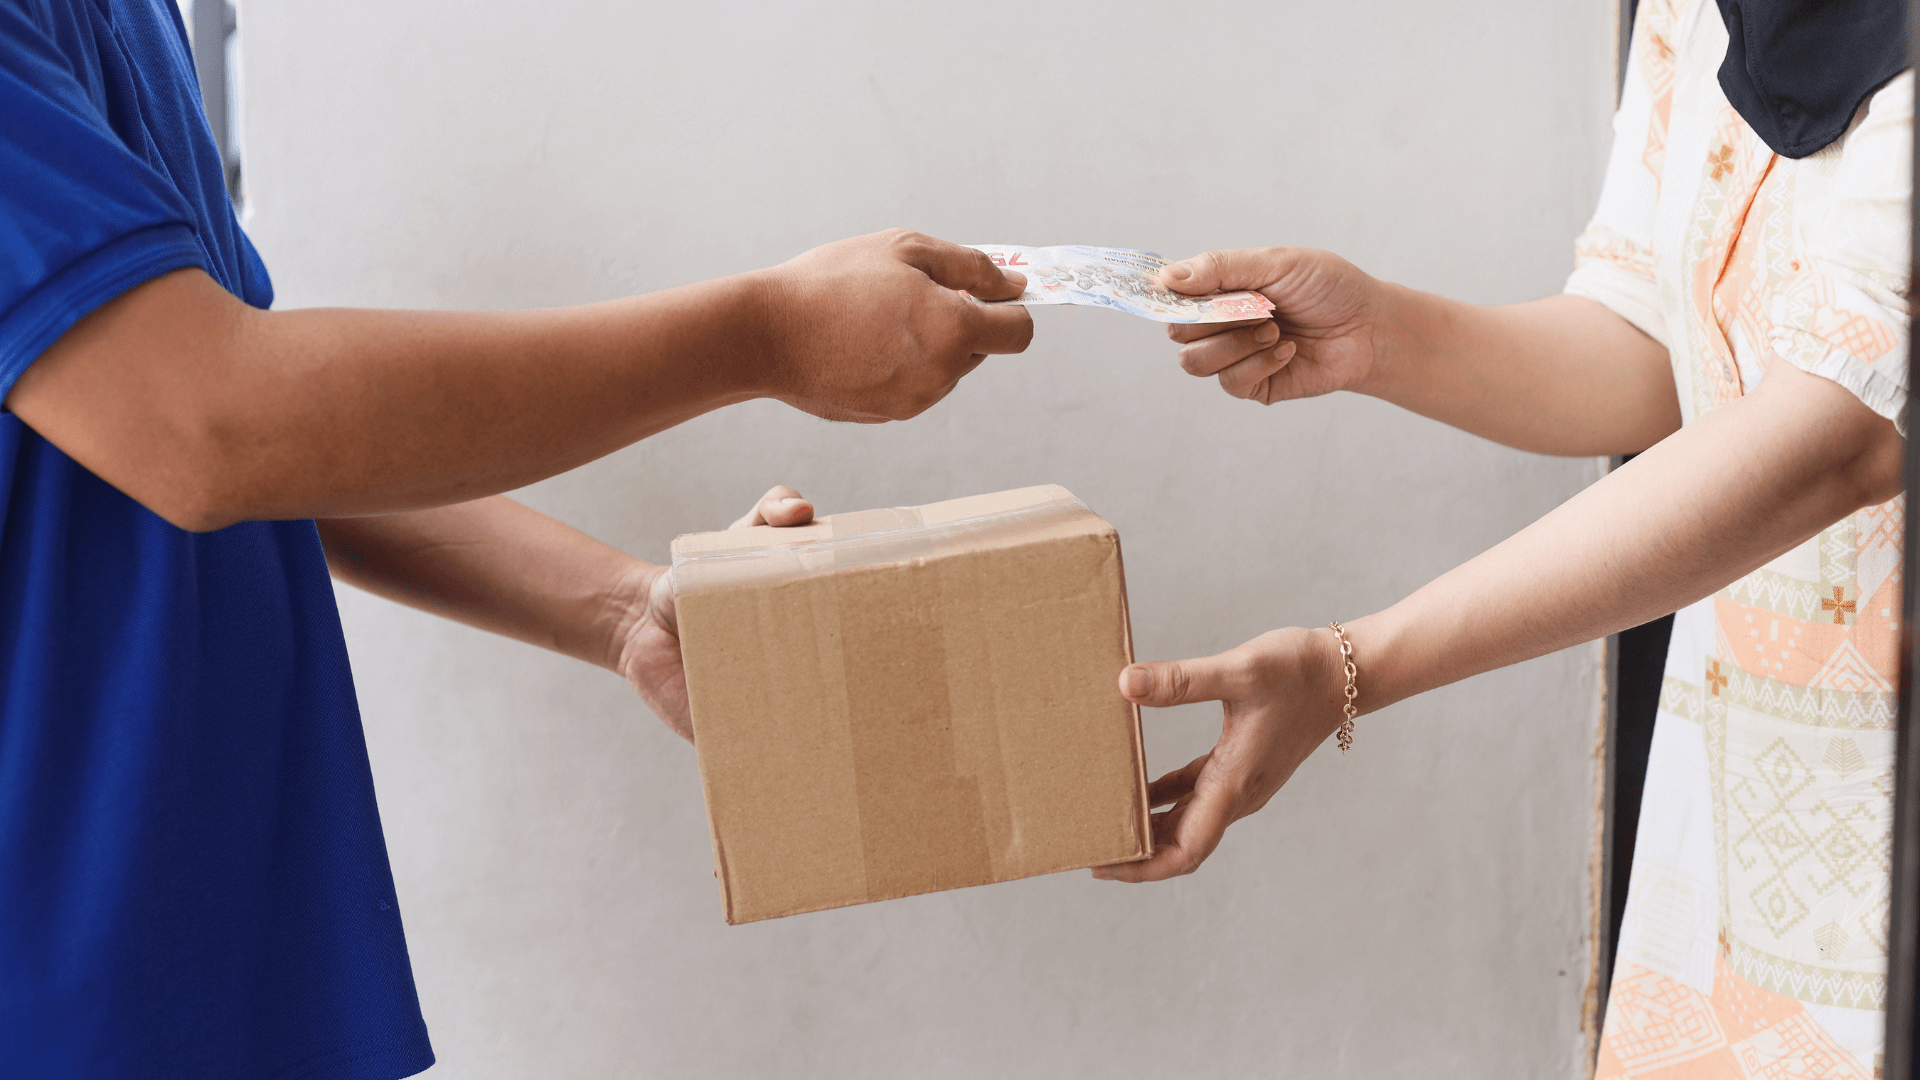 Cash on Delivery - Key Considerations for E-commerce Businesses in the UK